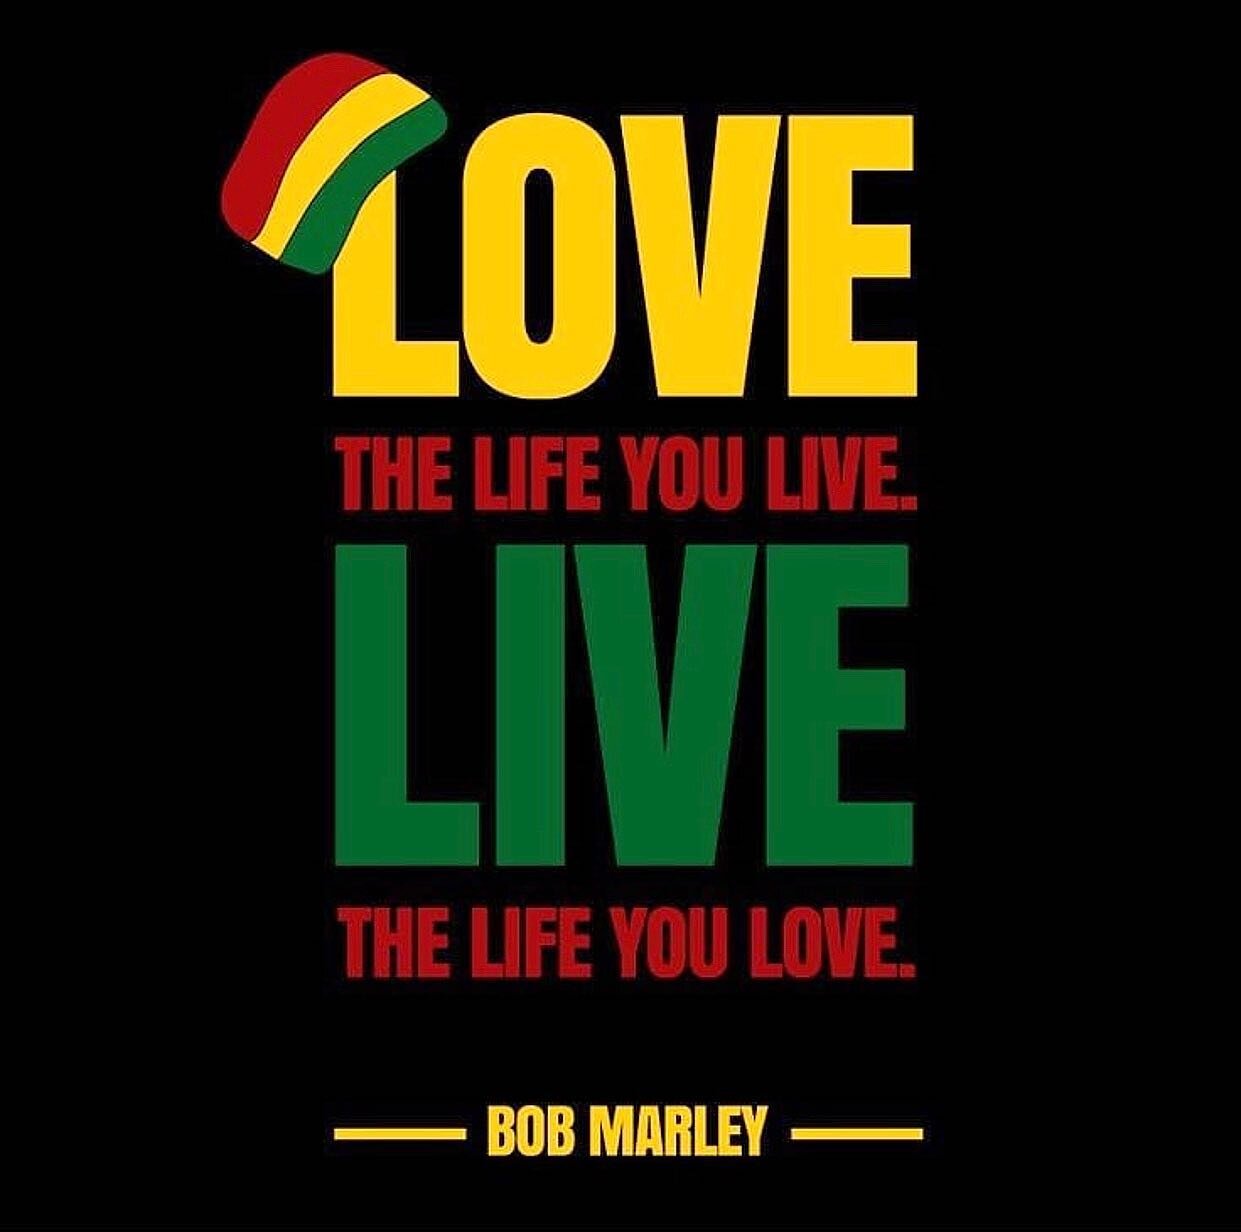 Love this quote! 🟥🇯🇲🟨🇯🇲🟩

76th Birthday wishes to the late great #musician known as #BobMarley! 
✊🏾🎵🙏🏾
.
.
#bobmarleyday #quotes #music #bobmarleyquotes #musicislife #reggae #blackhistorymonth #bobmarley76 #westindies #blackhistory #quoteo